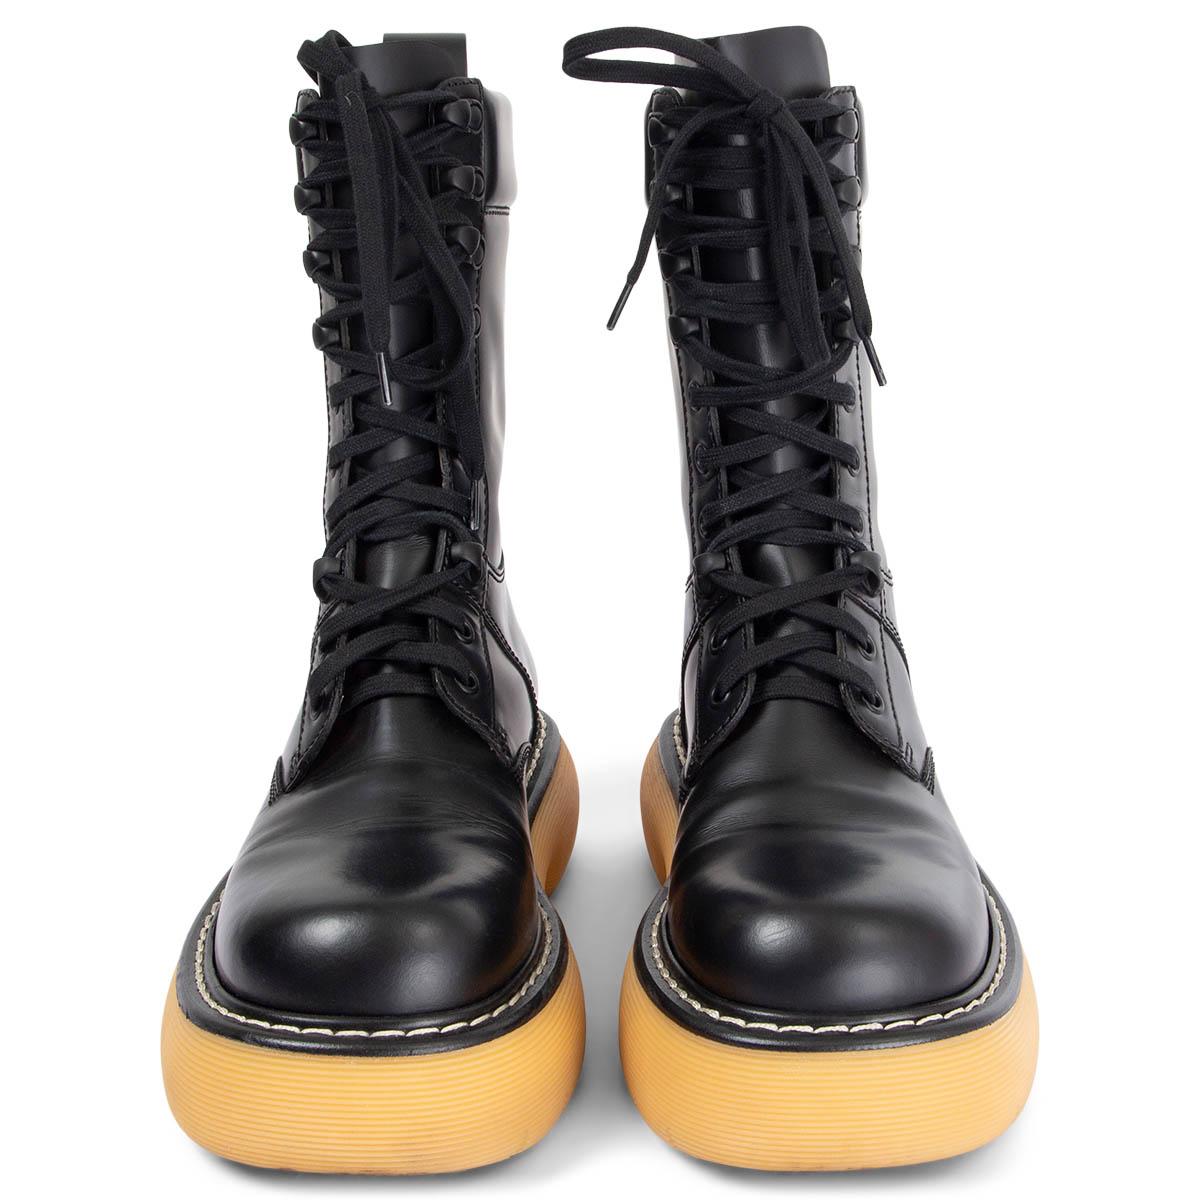 100% authentic Bottega Veneta The Bounce lace-up combat boots in black calfskin with contrasting yellow tread sole. Have been worn and are in excellent condition. Come with dust bags.

Measurements
Imprinted Size	38.5
Shoe Size	38.5
Inside